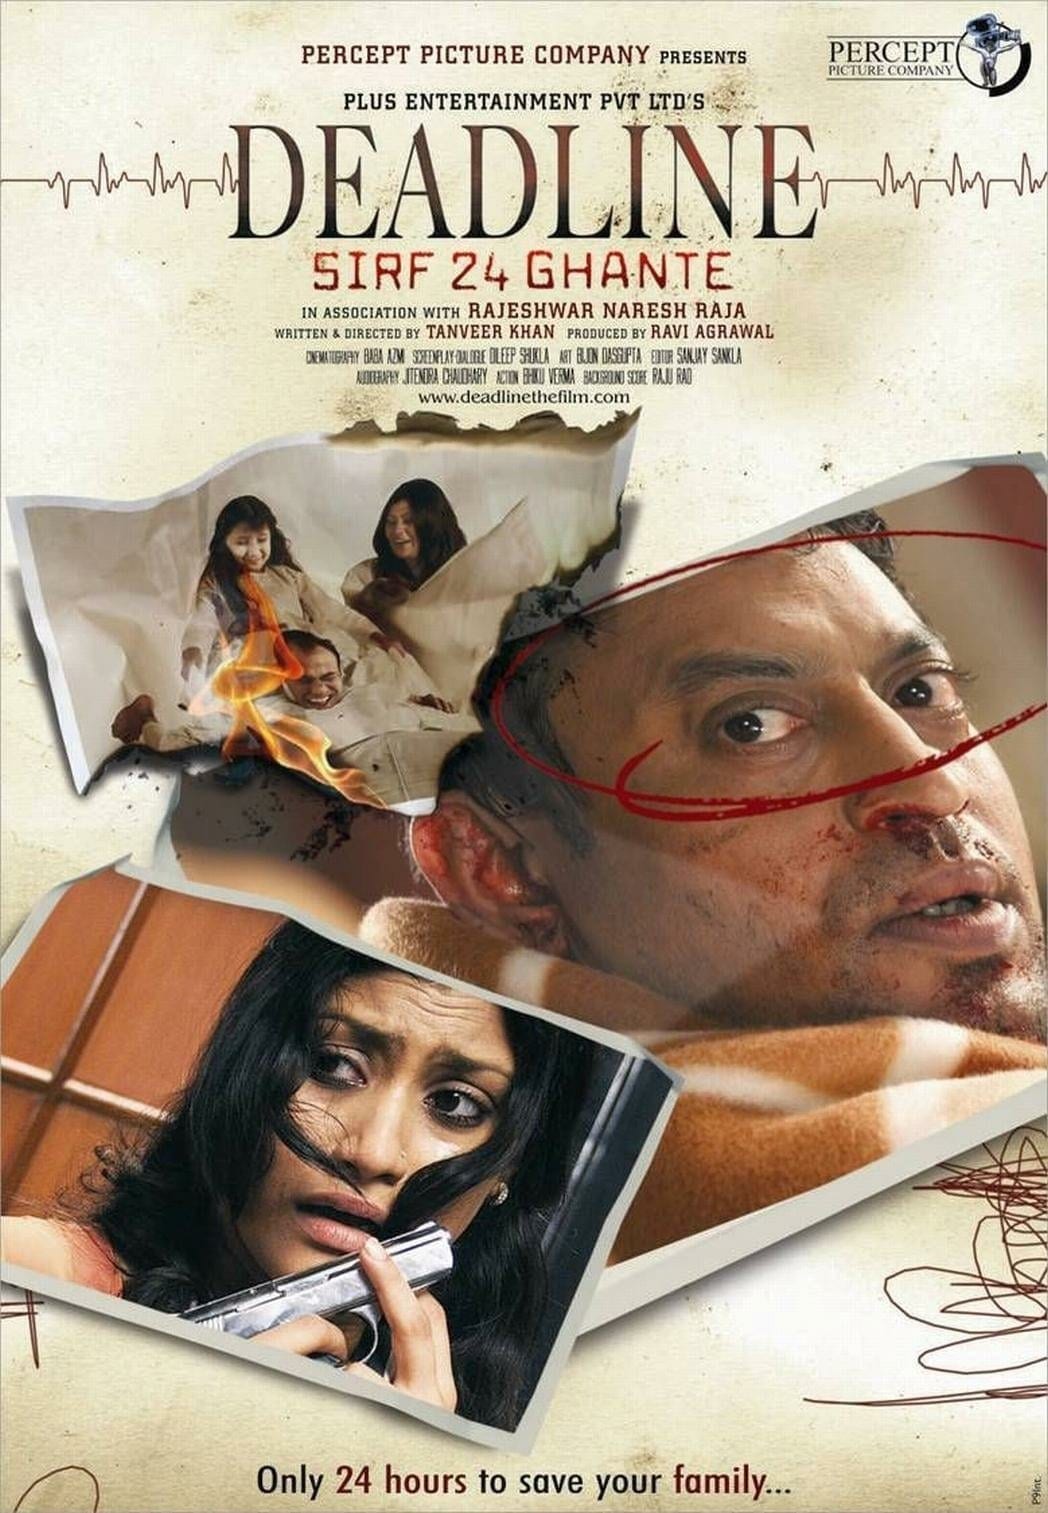 Poster for the movie "Deadline: Sirf 24 Ghante"